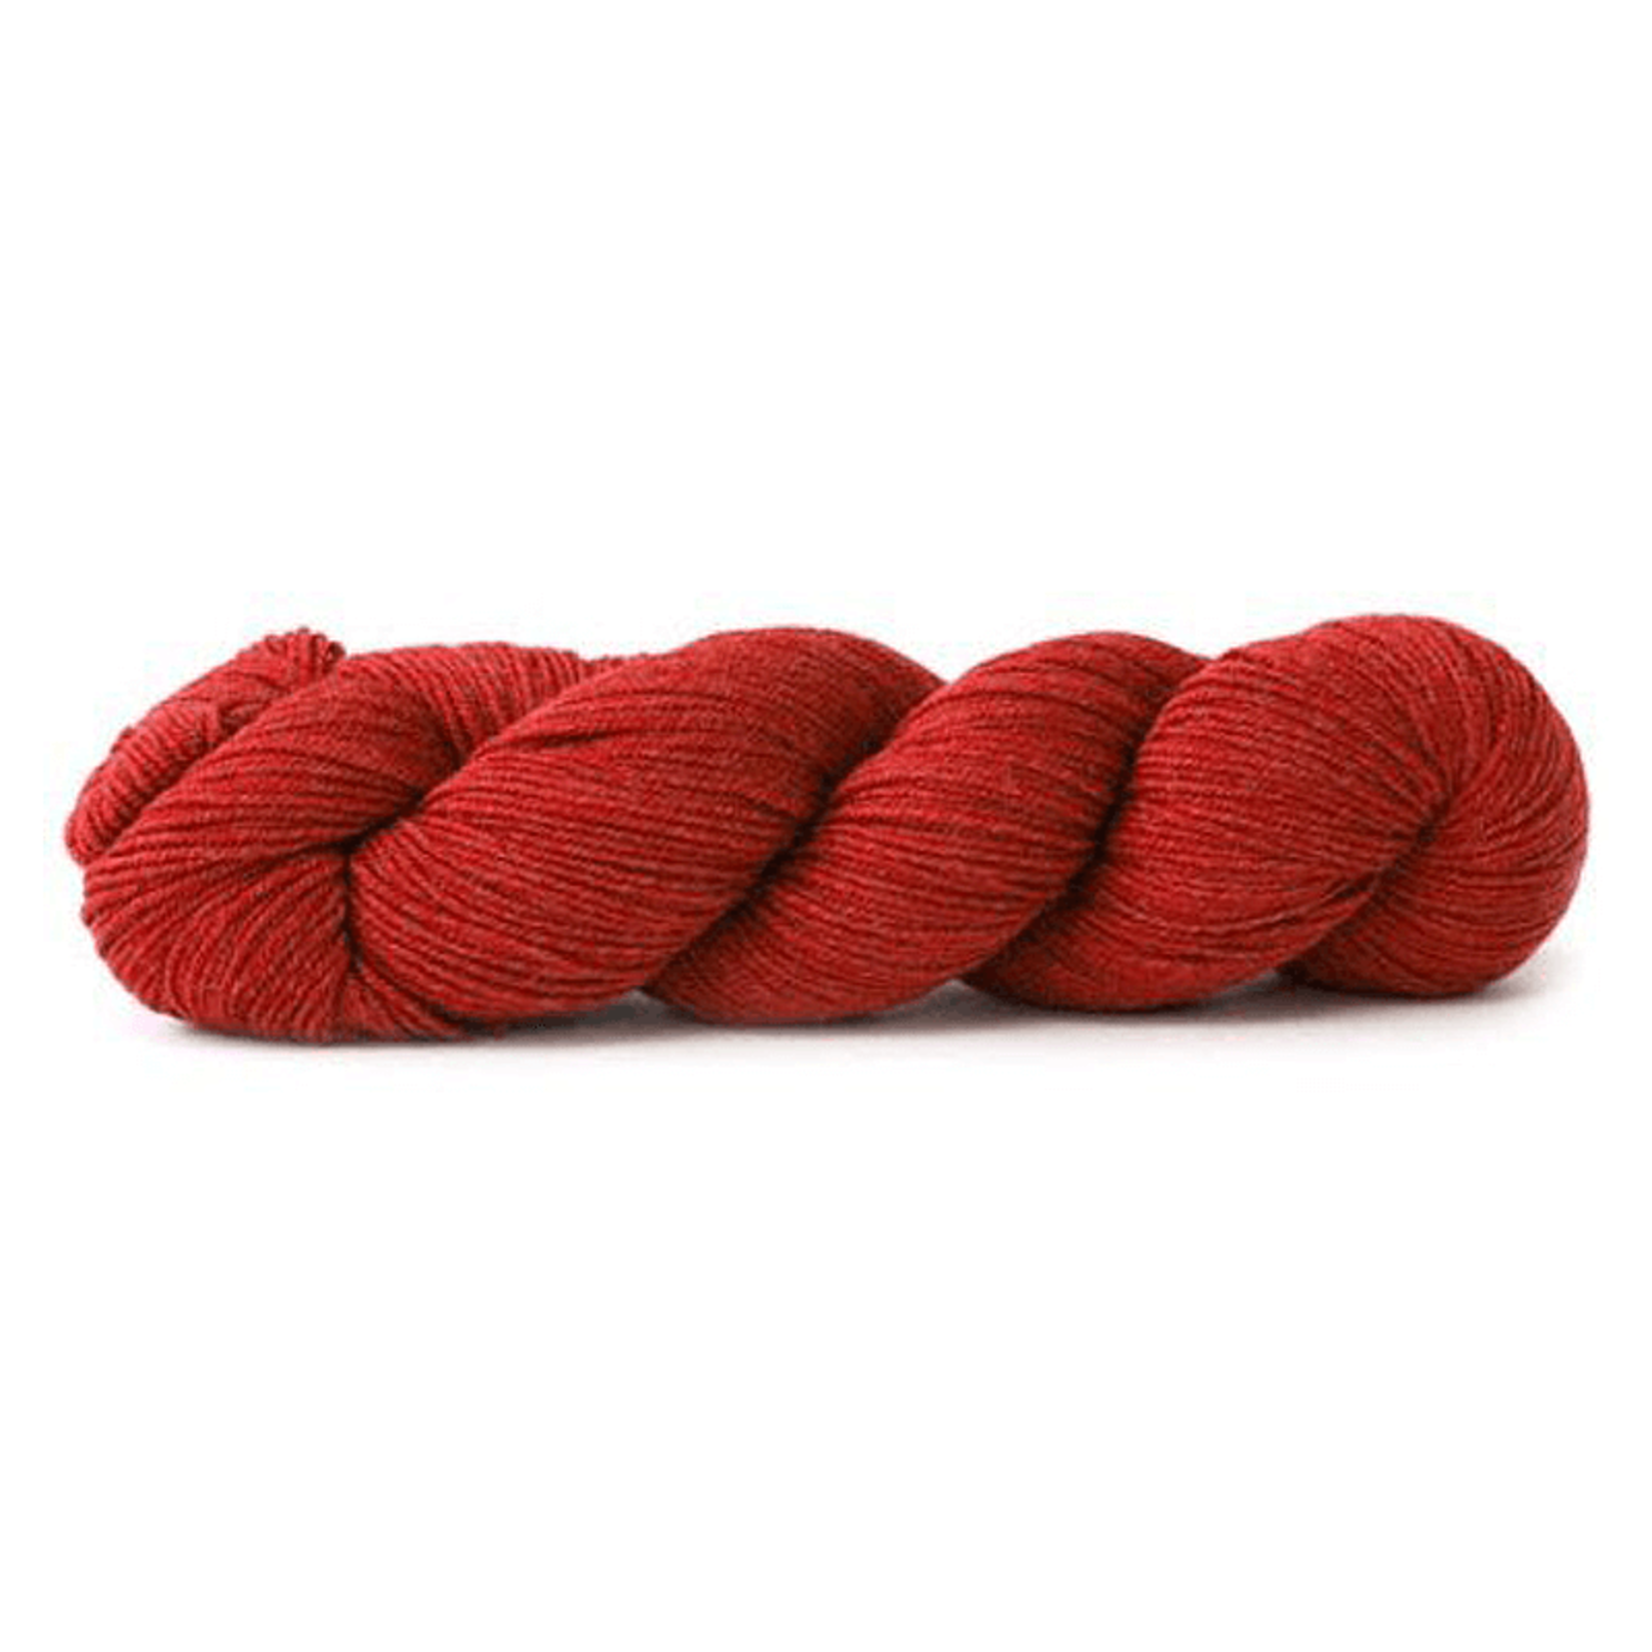 Skacel Collection Sueno Worsted, 1322, Cherry Pie